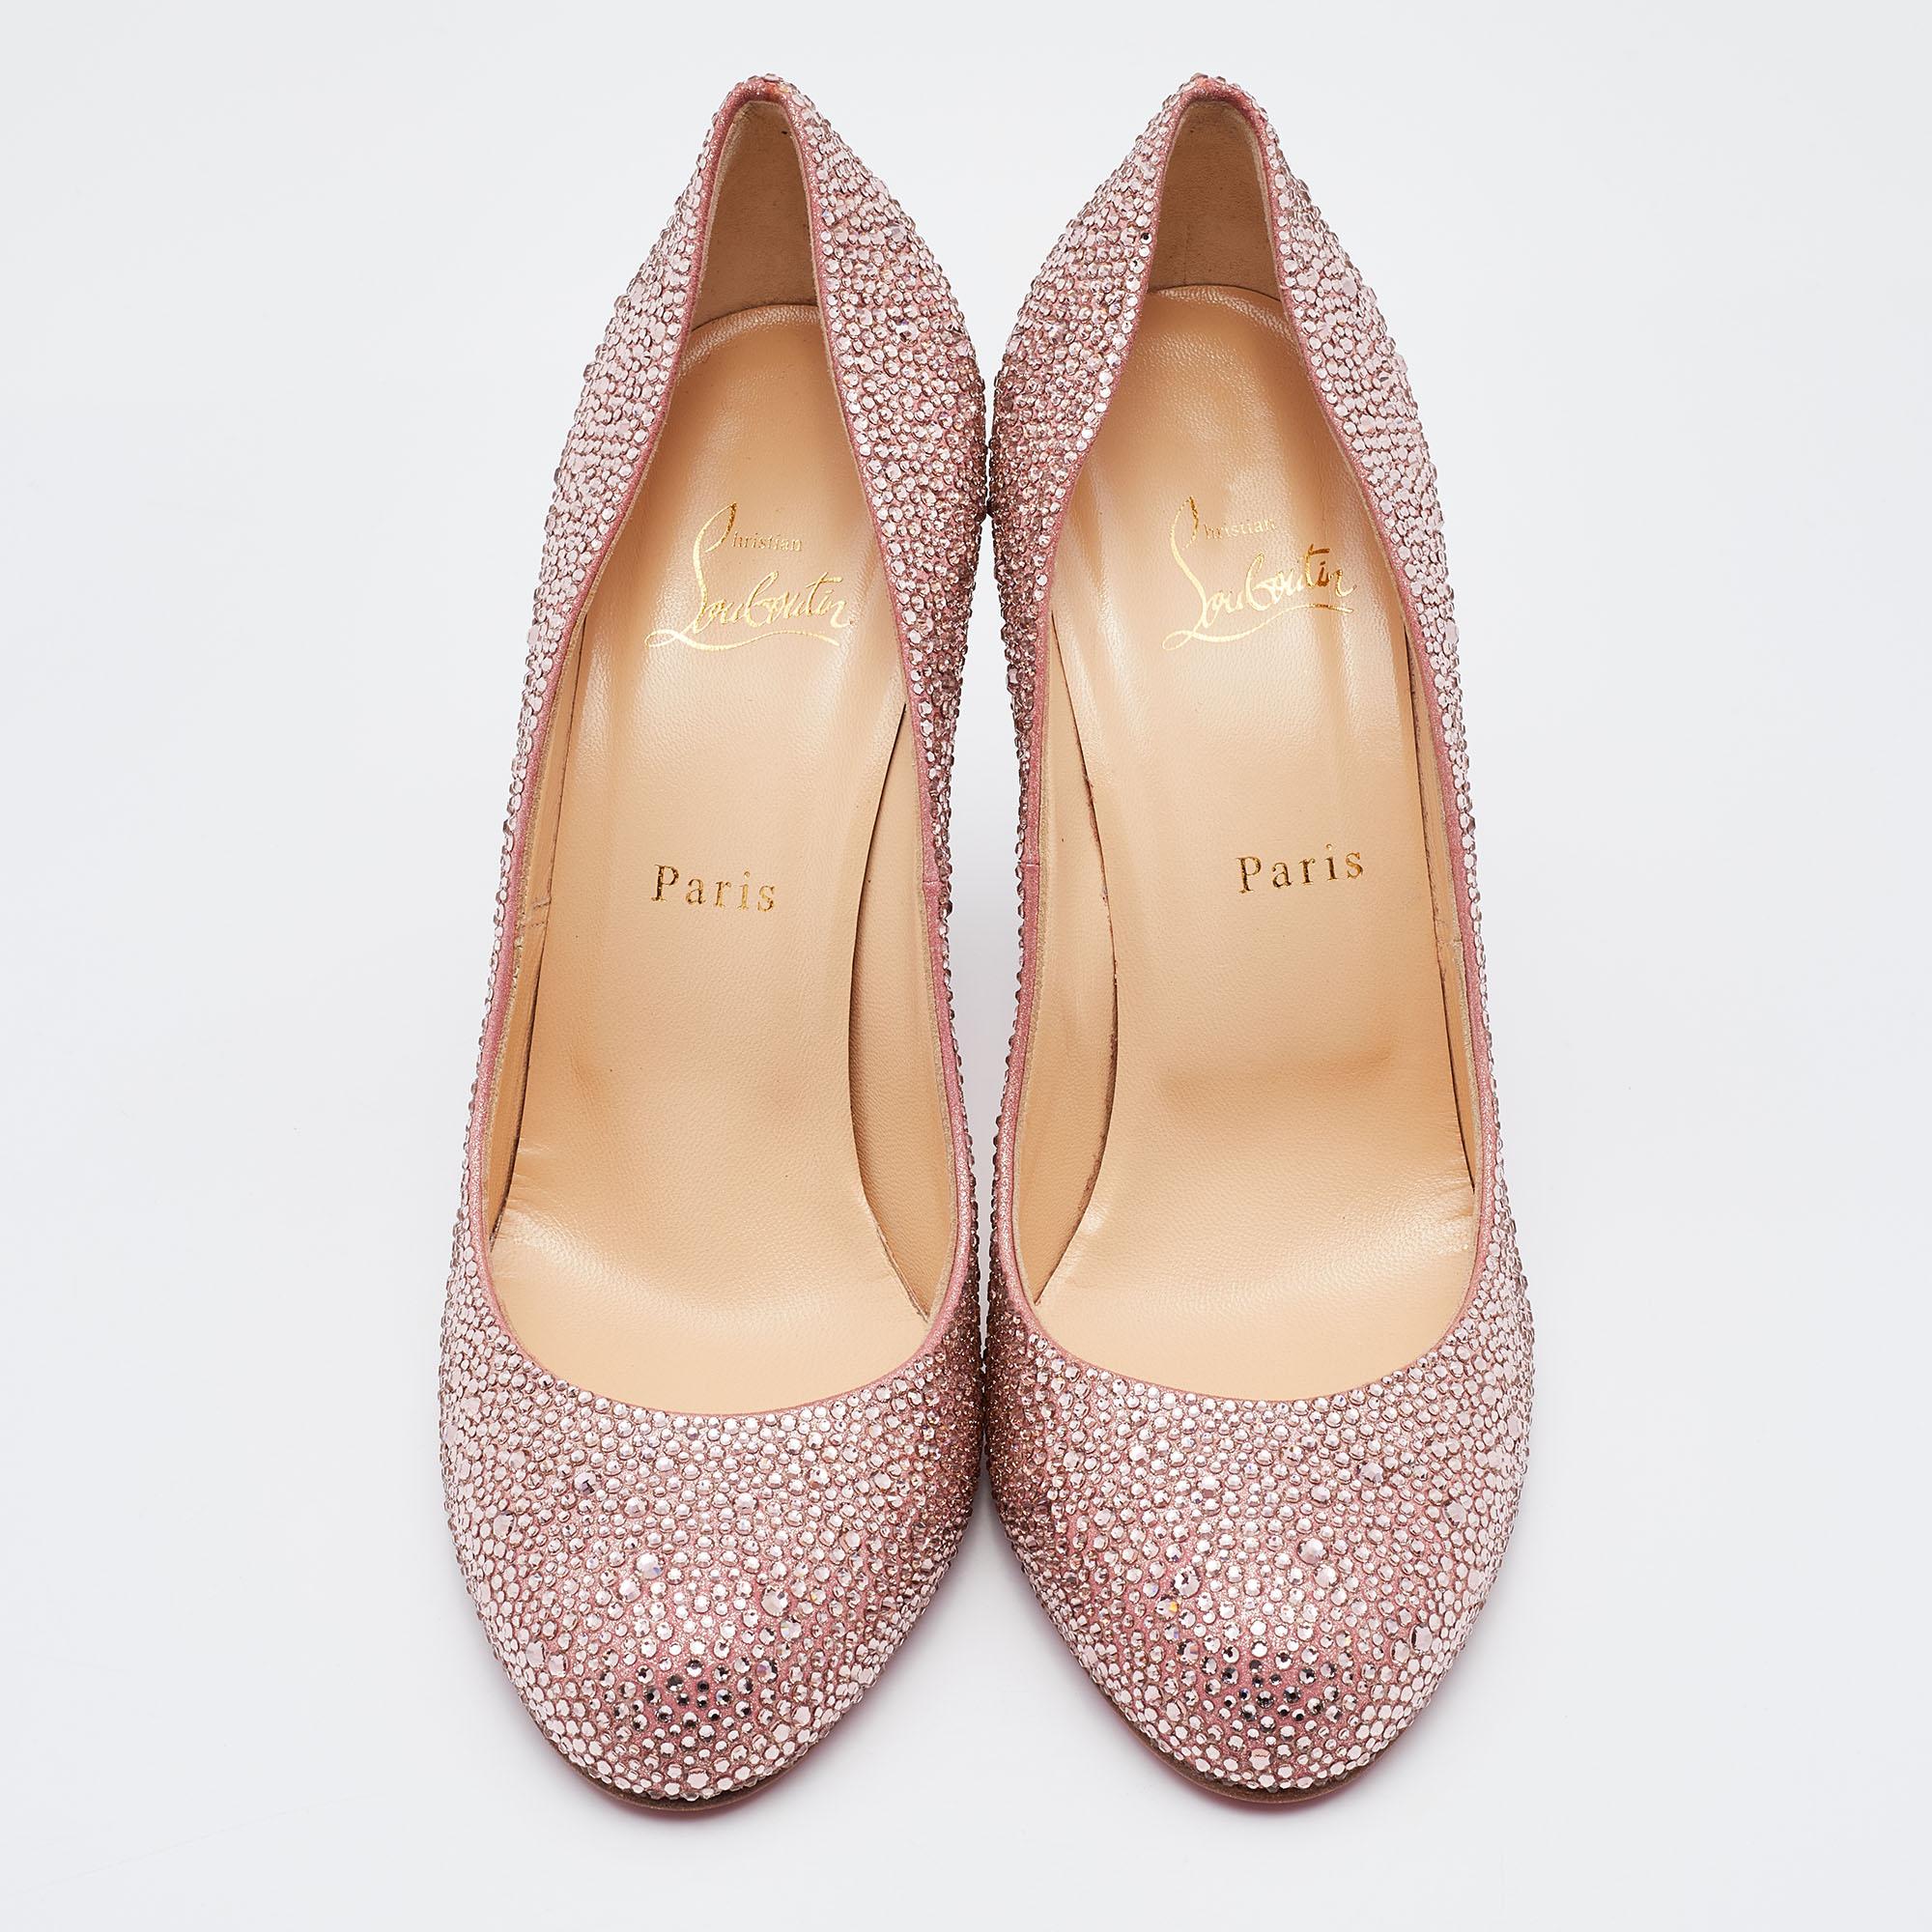 Christian Louboutin Pink Crystal Embellished Suede Fifi Strass Pumps Size 40.5 4